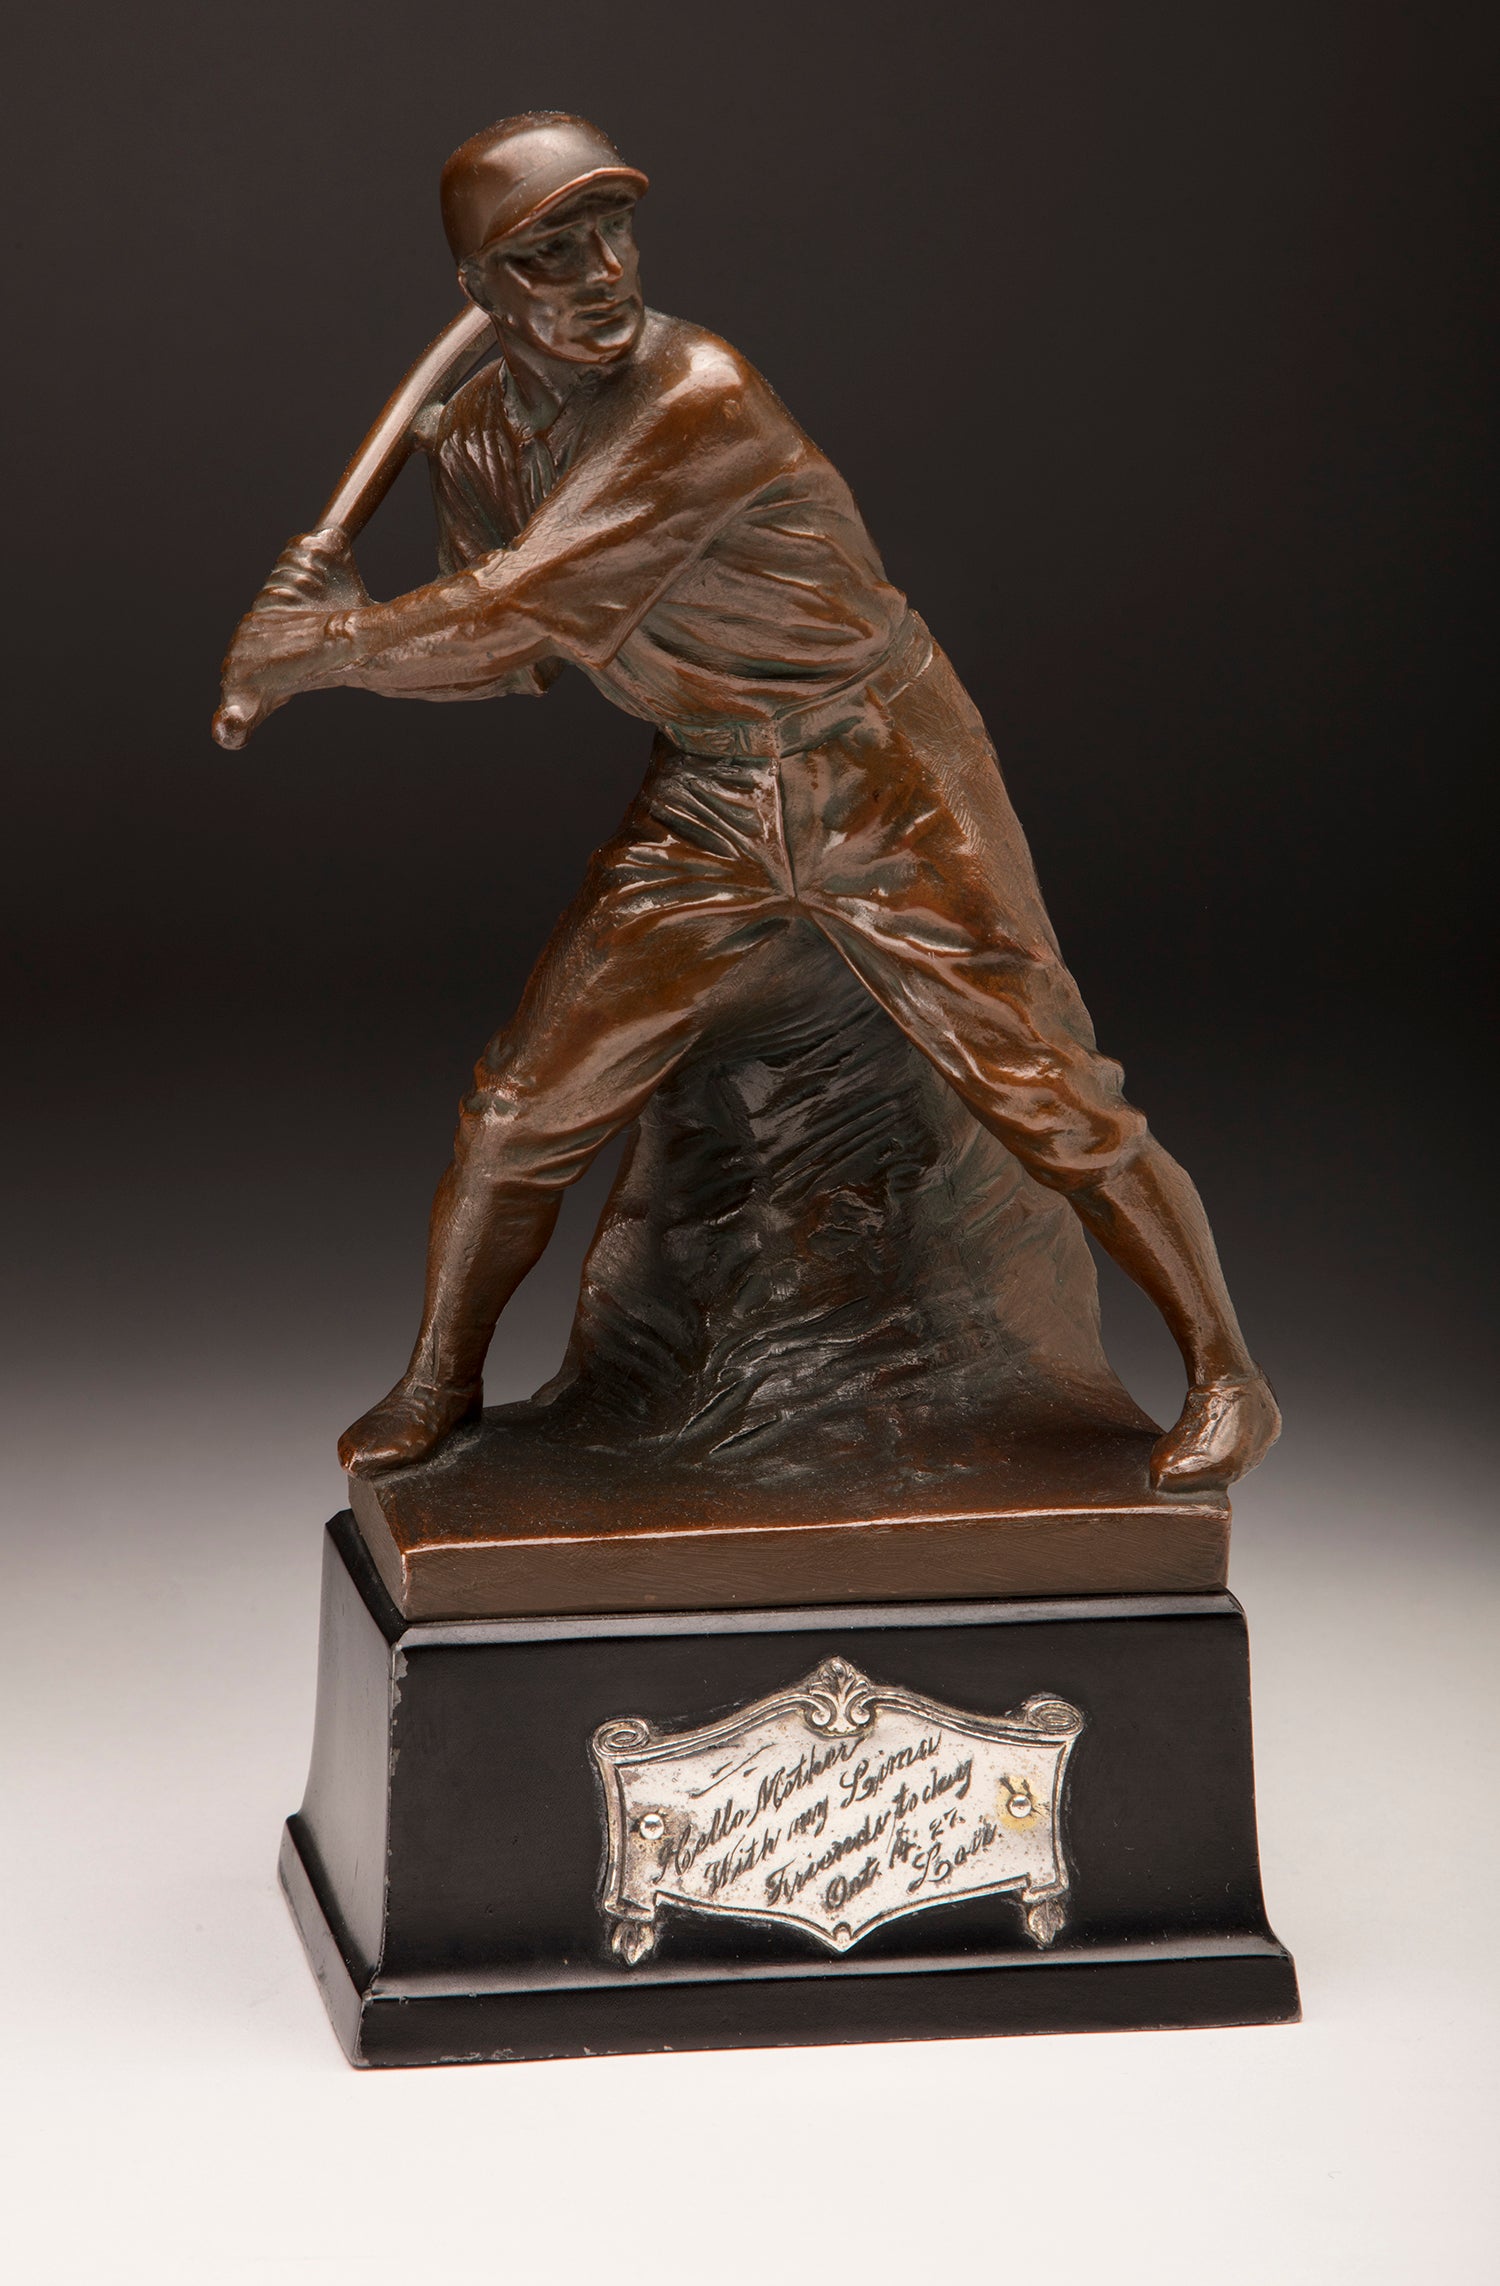 Trophy Gehrig presented his mother a part of Museum collection